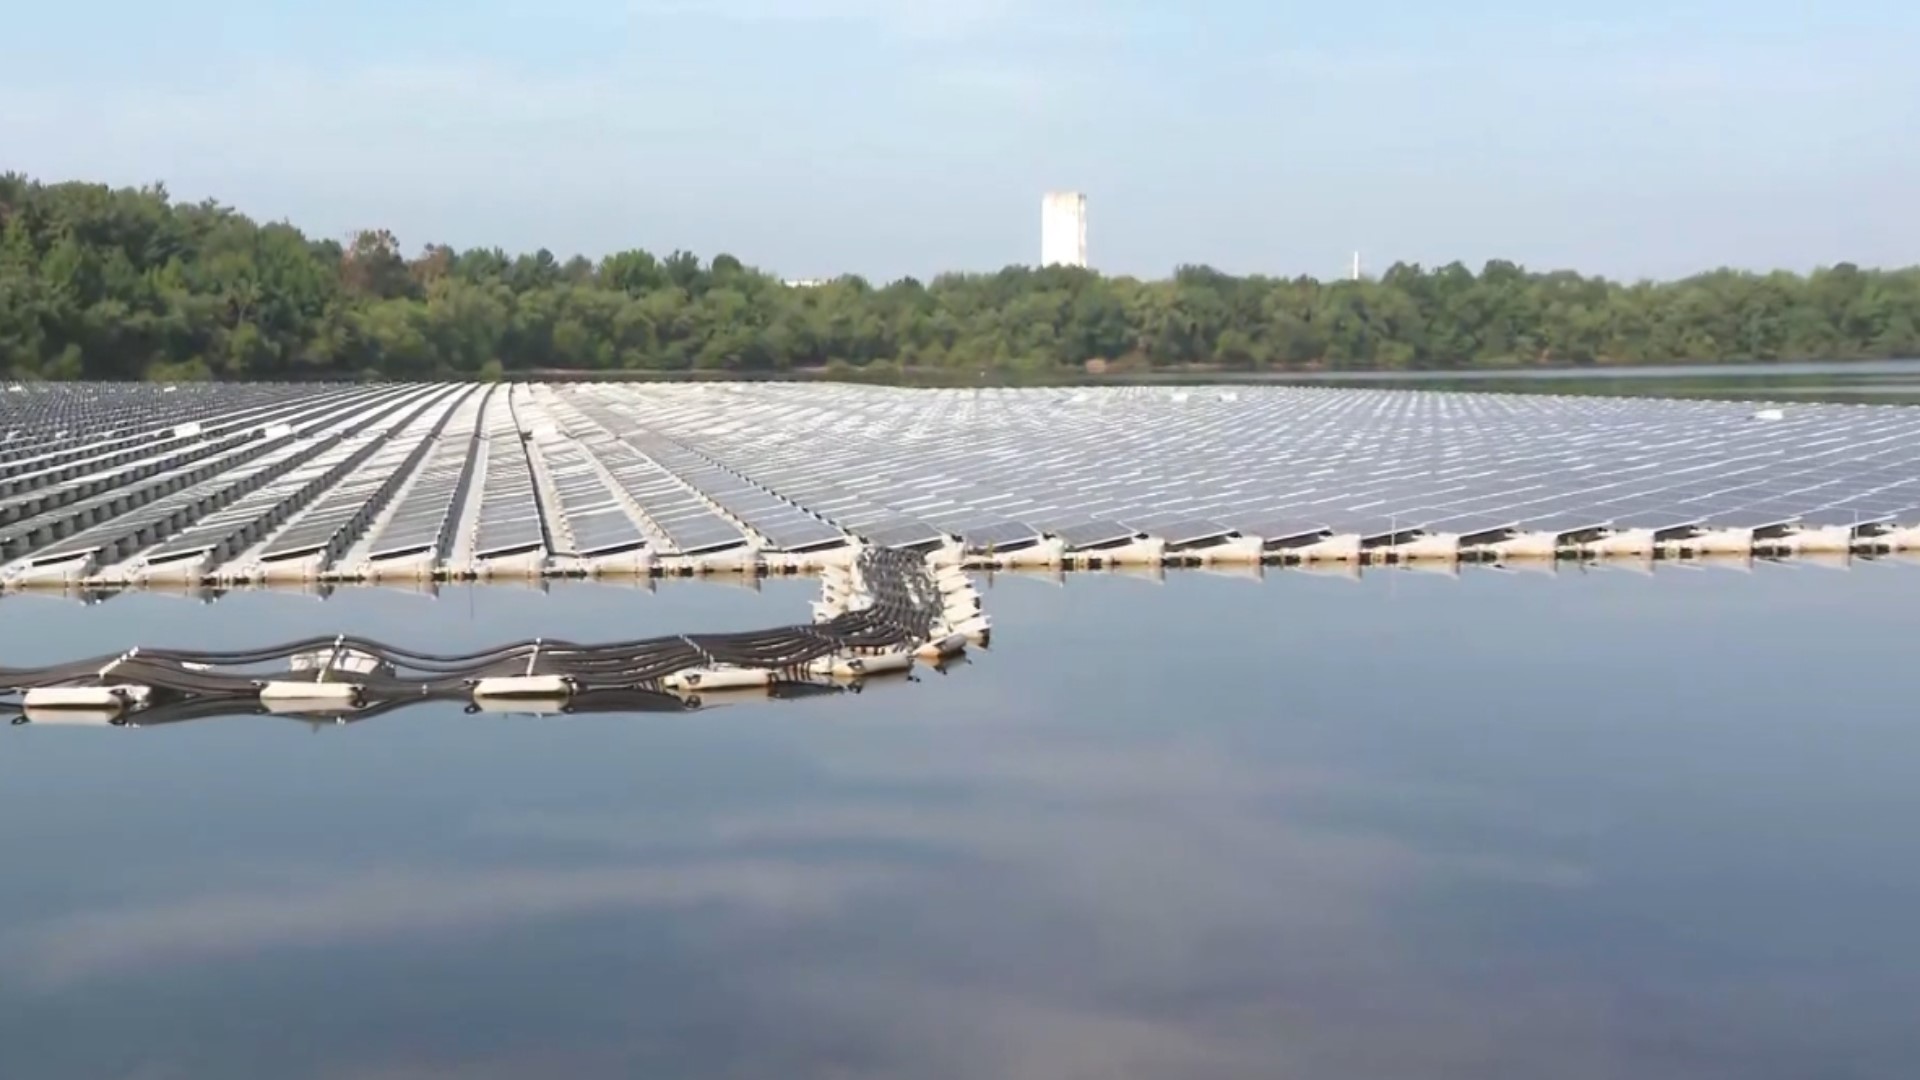 Floating solar panels can become a major source for the planet.